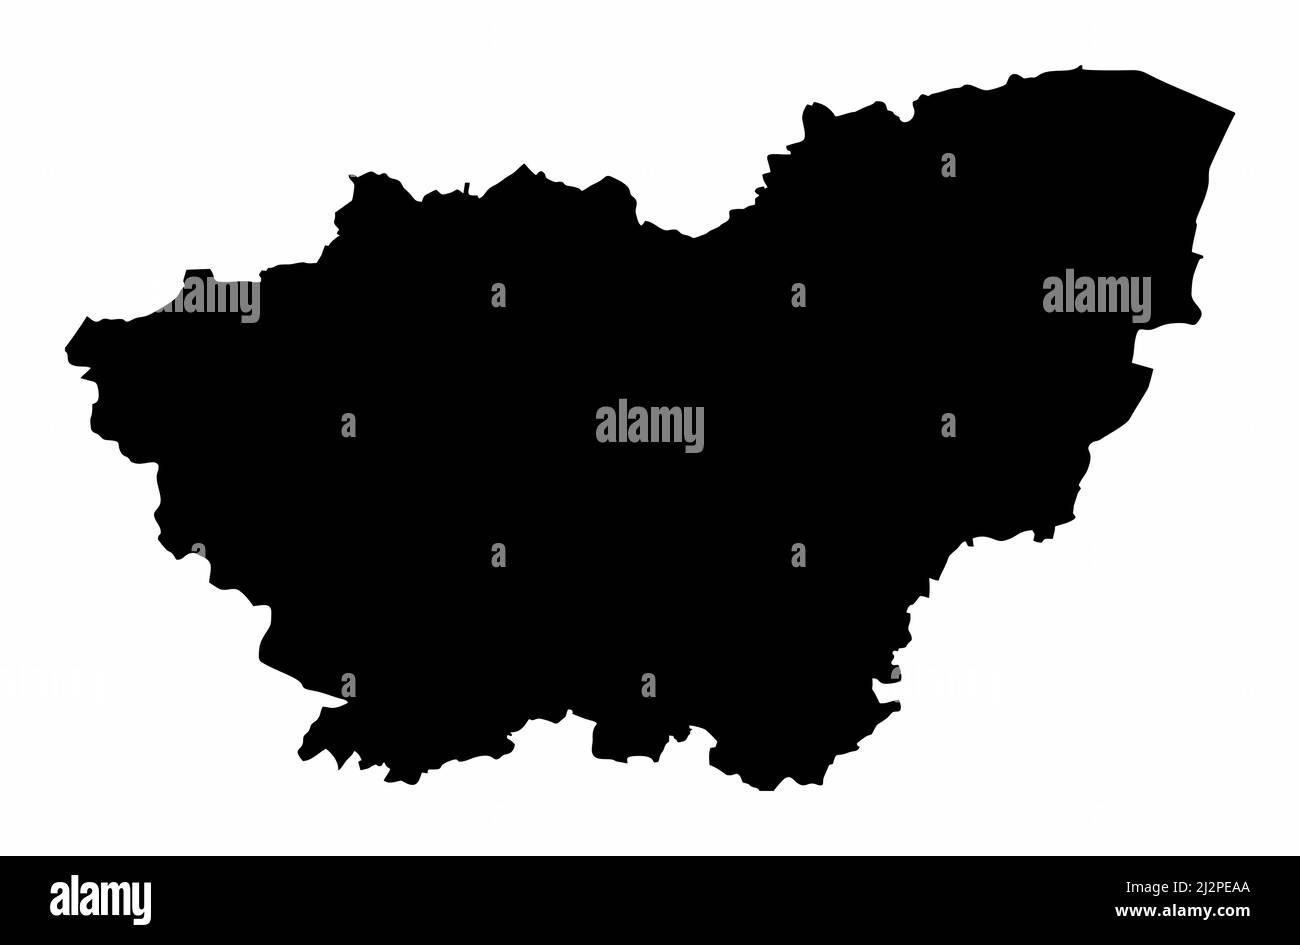 South Yorkshire county, silhouette map isolated on white background, England Stock Vector